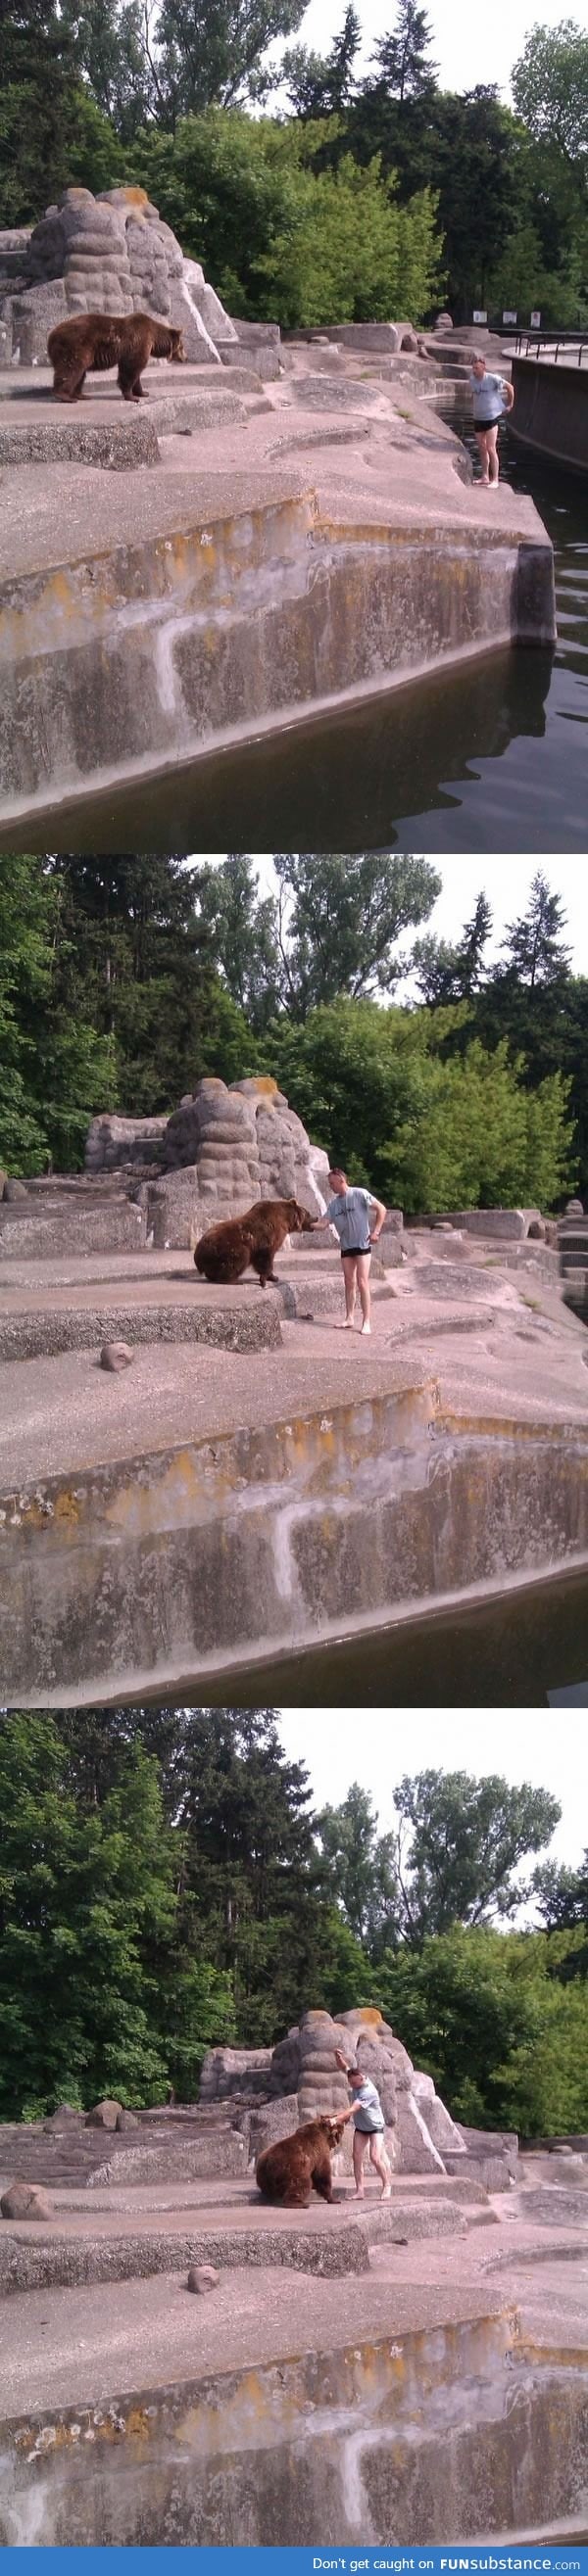 Stoned guy at Warsaw ZOO jumped in to the bear pen to pet the bear